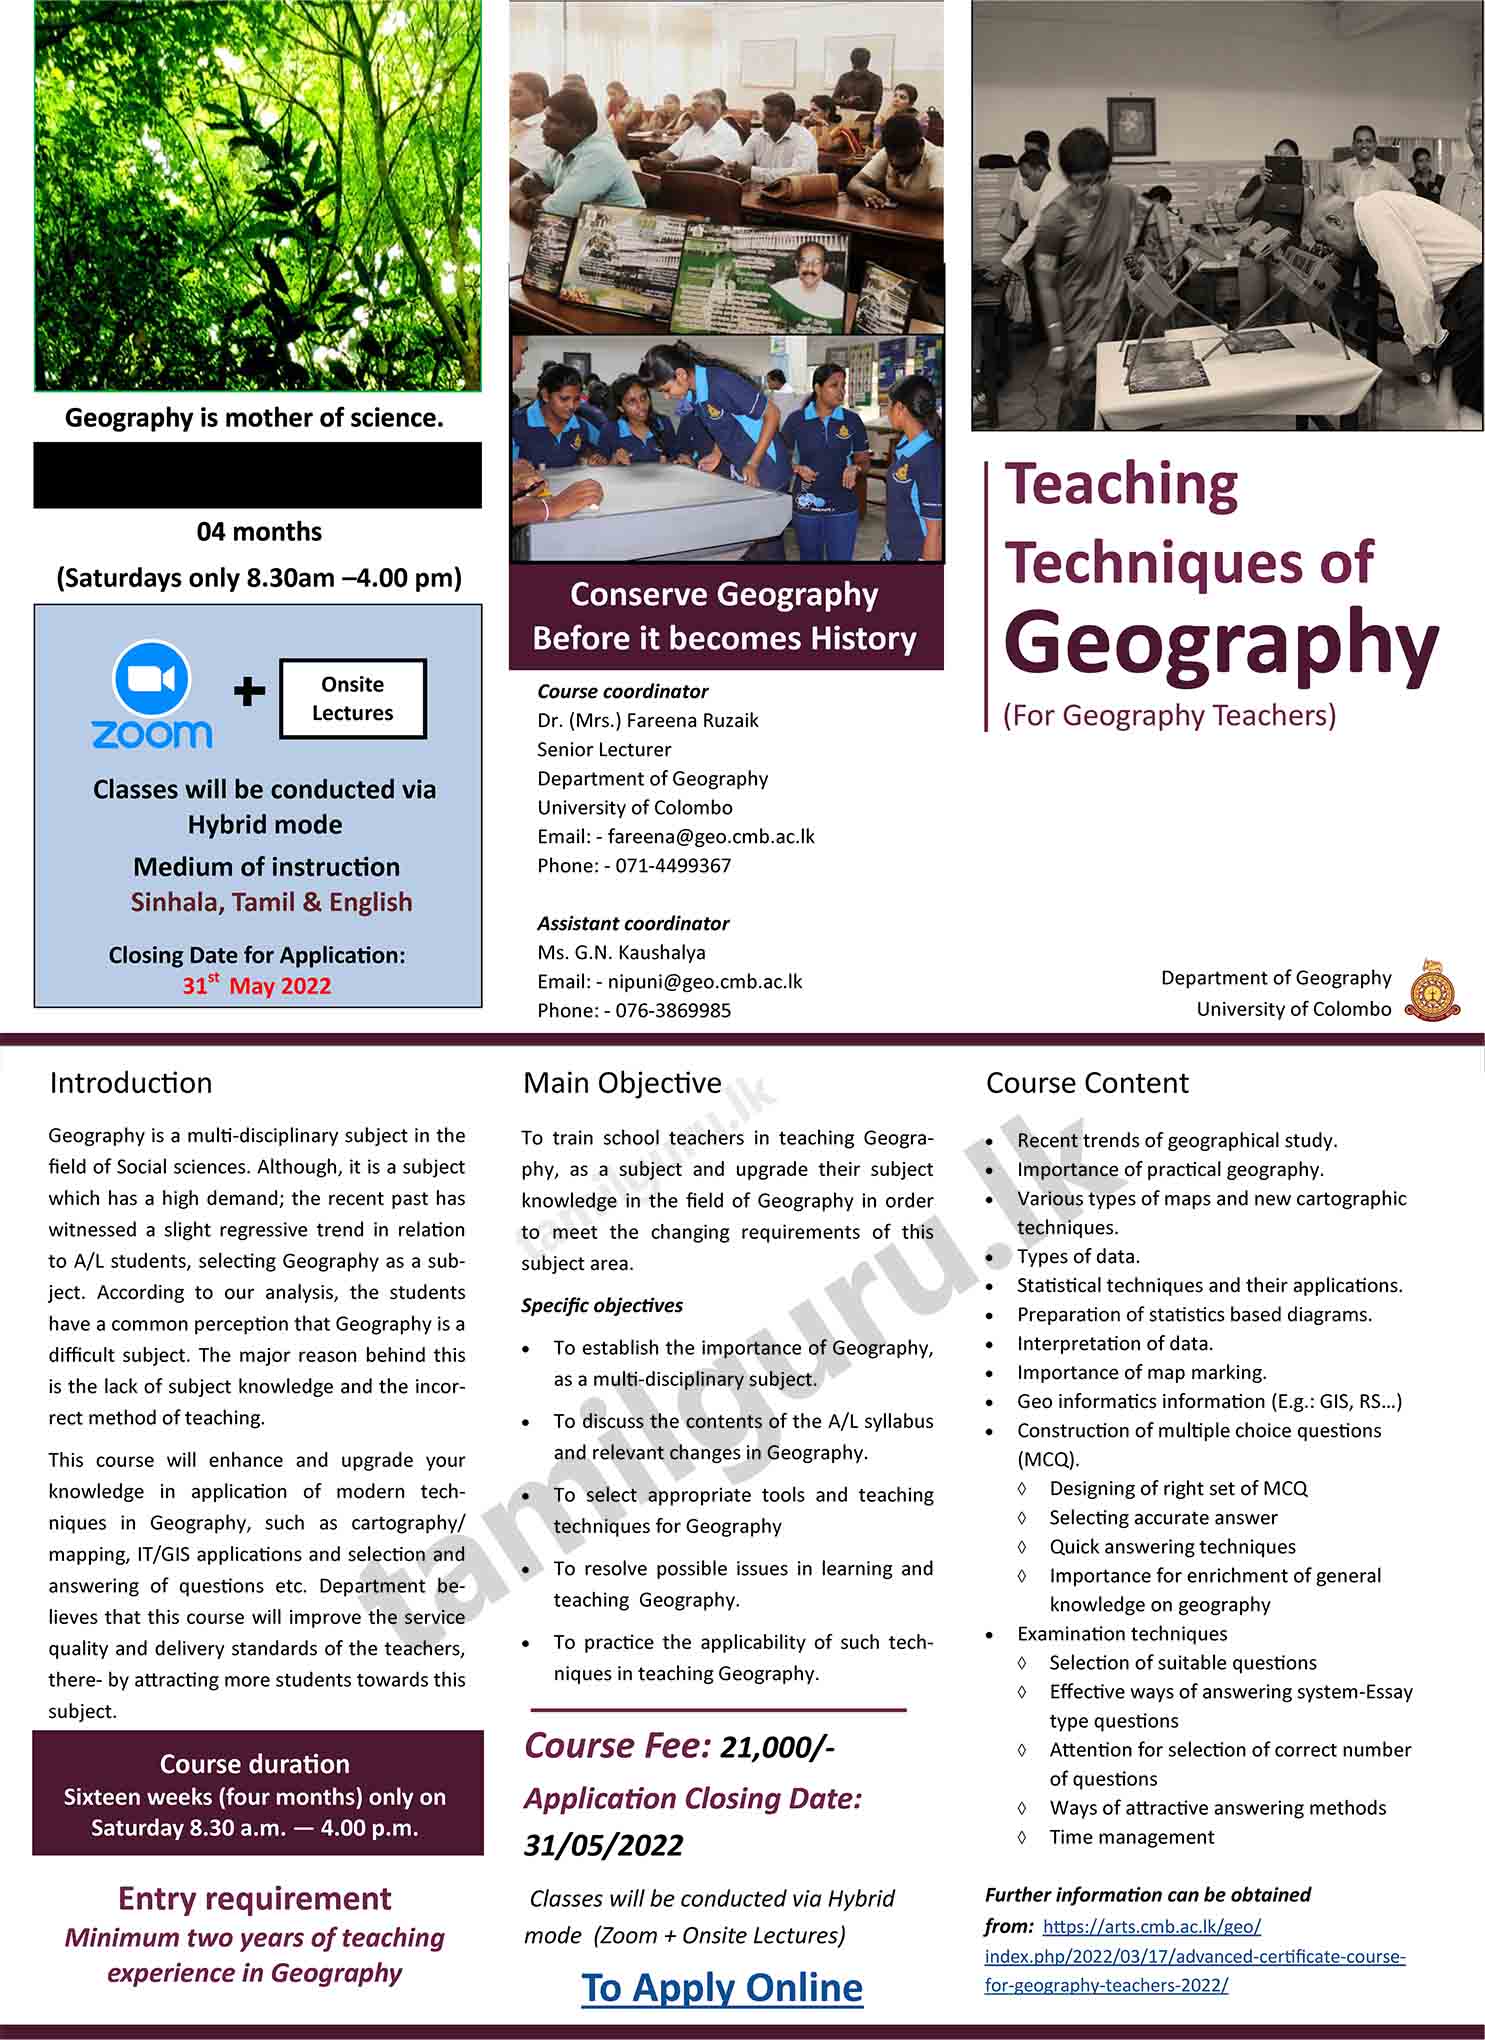 Advanced Certificate Course for Geography Teachers 2022 - University of Colombo (“Teaching Techniques of Geography” for Geography Teachers)
